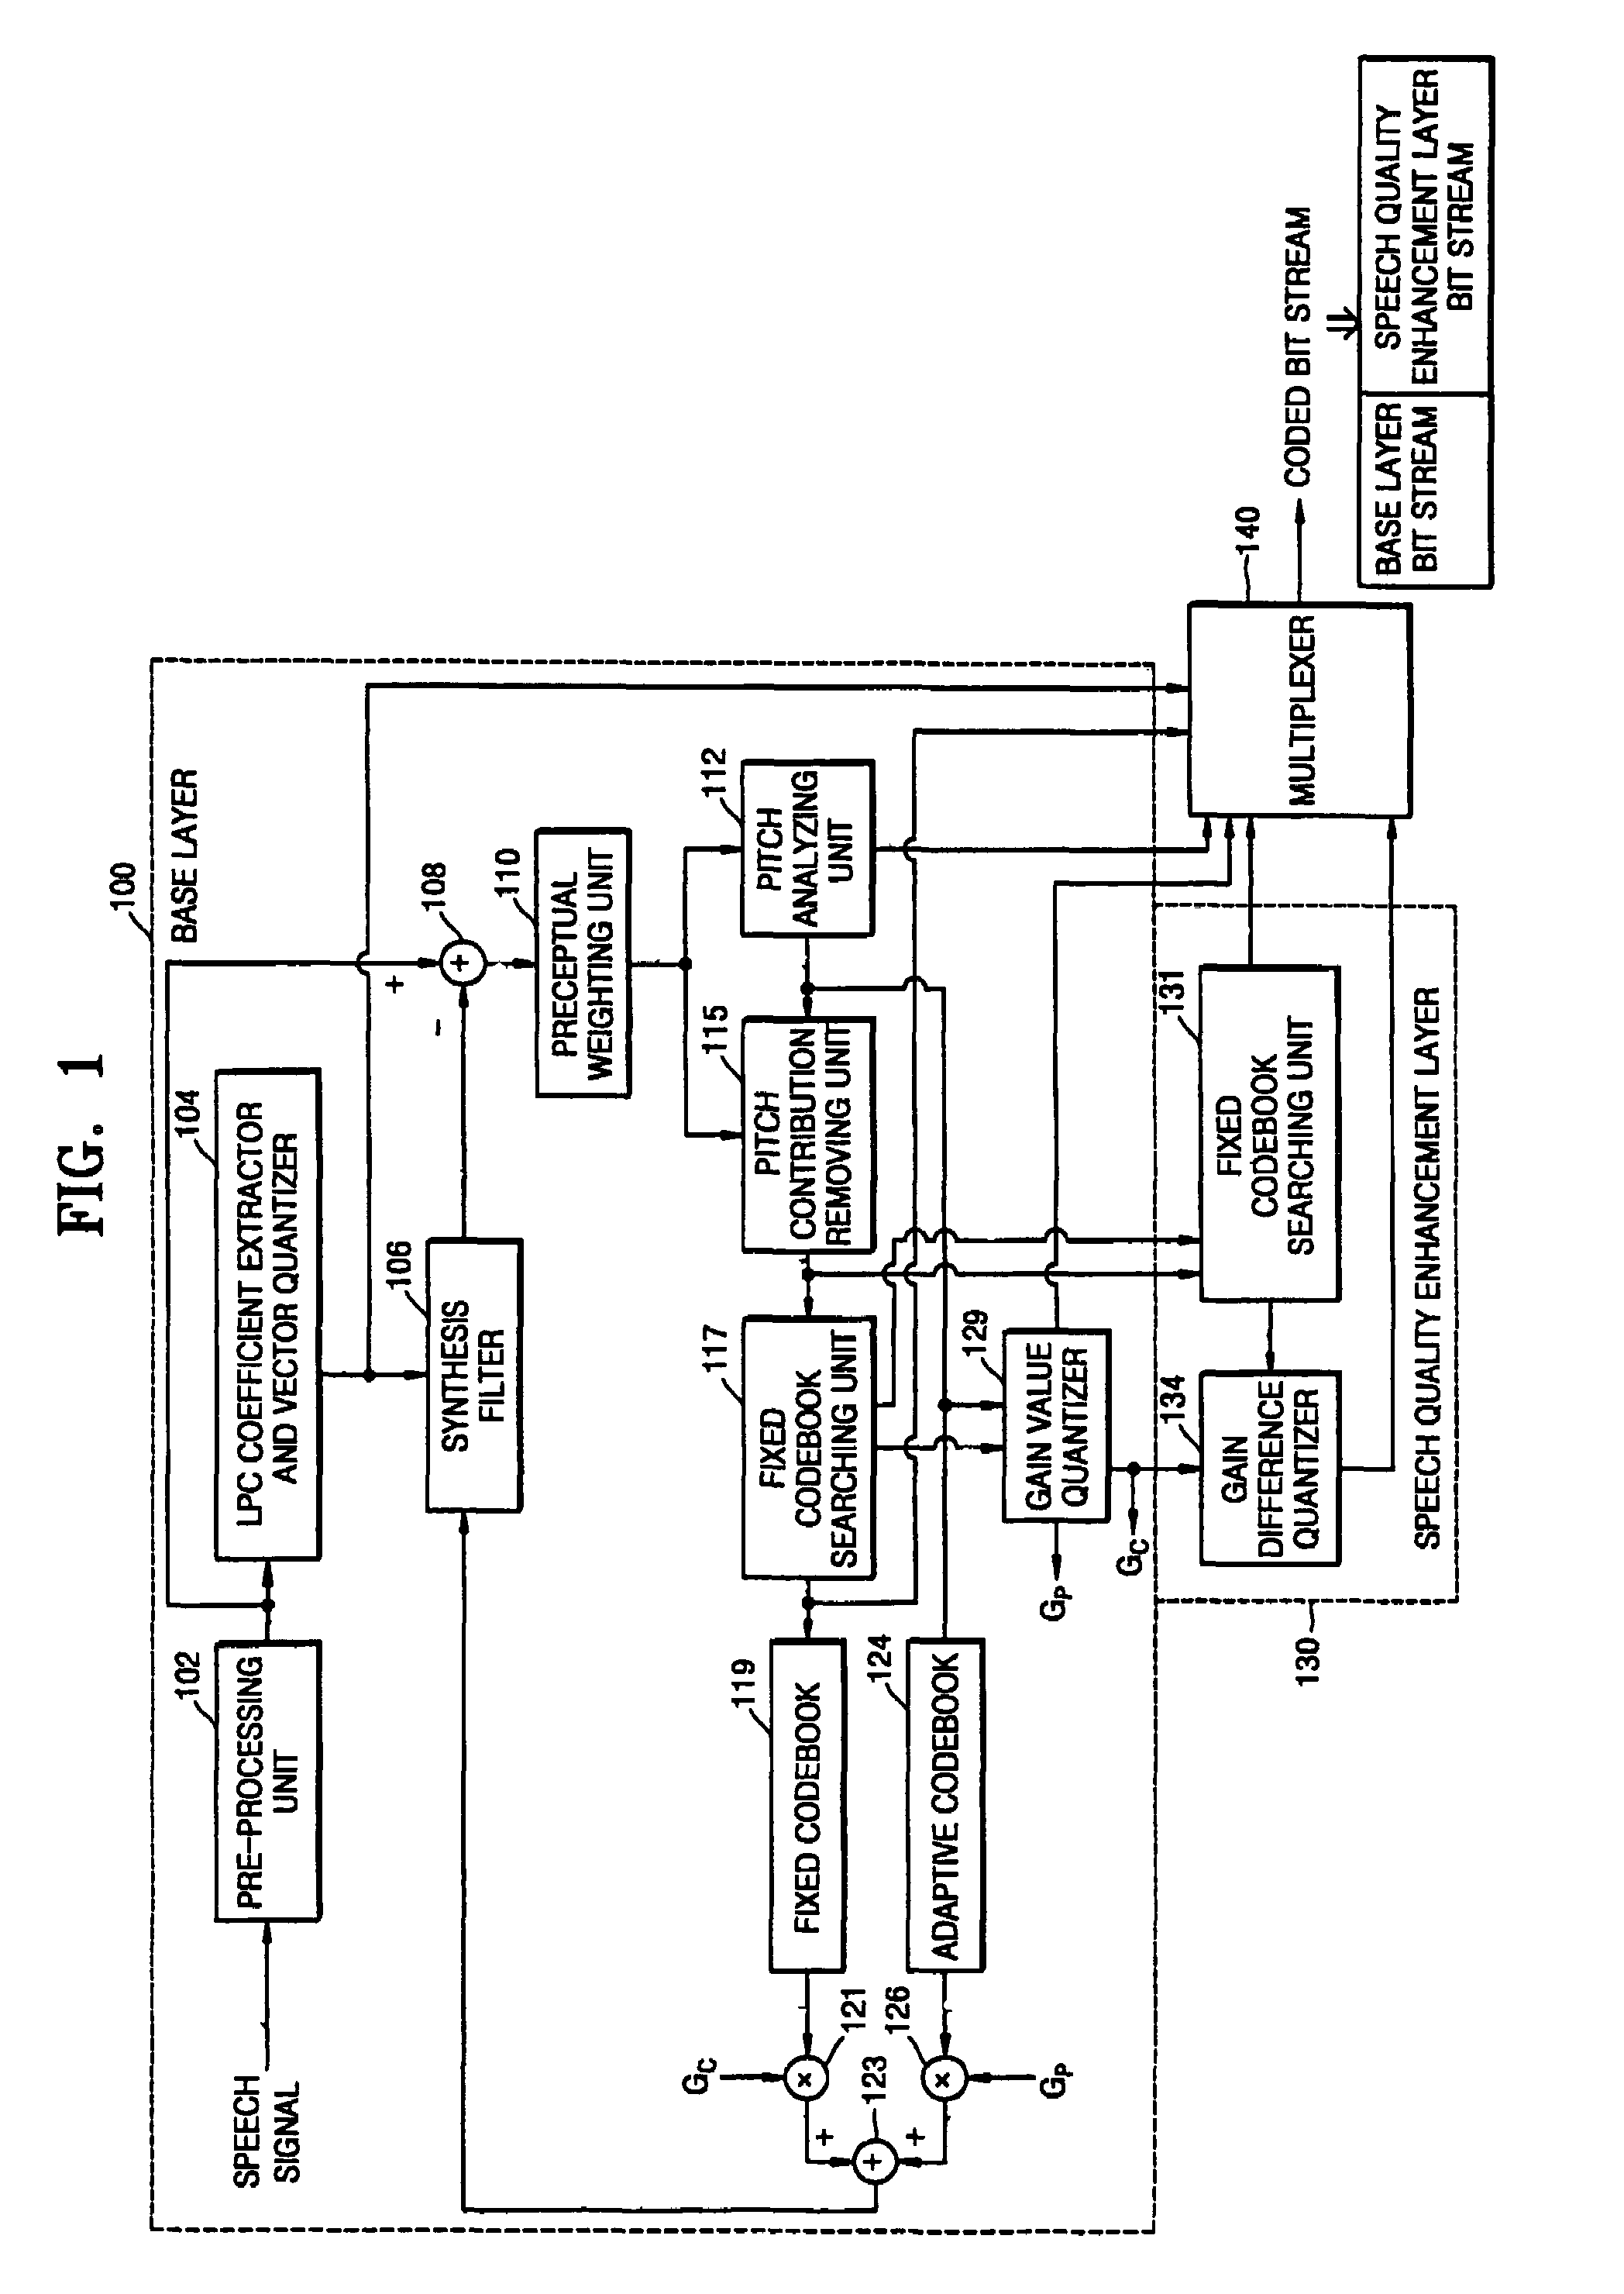 Bit rate scalable speech coding and decoding apparatus and method